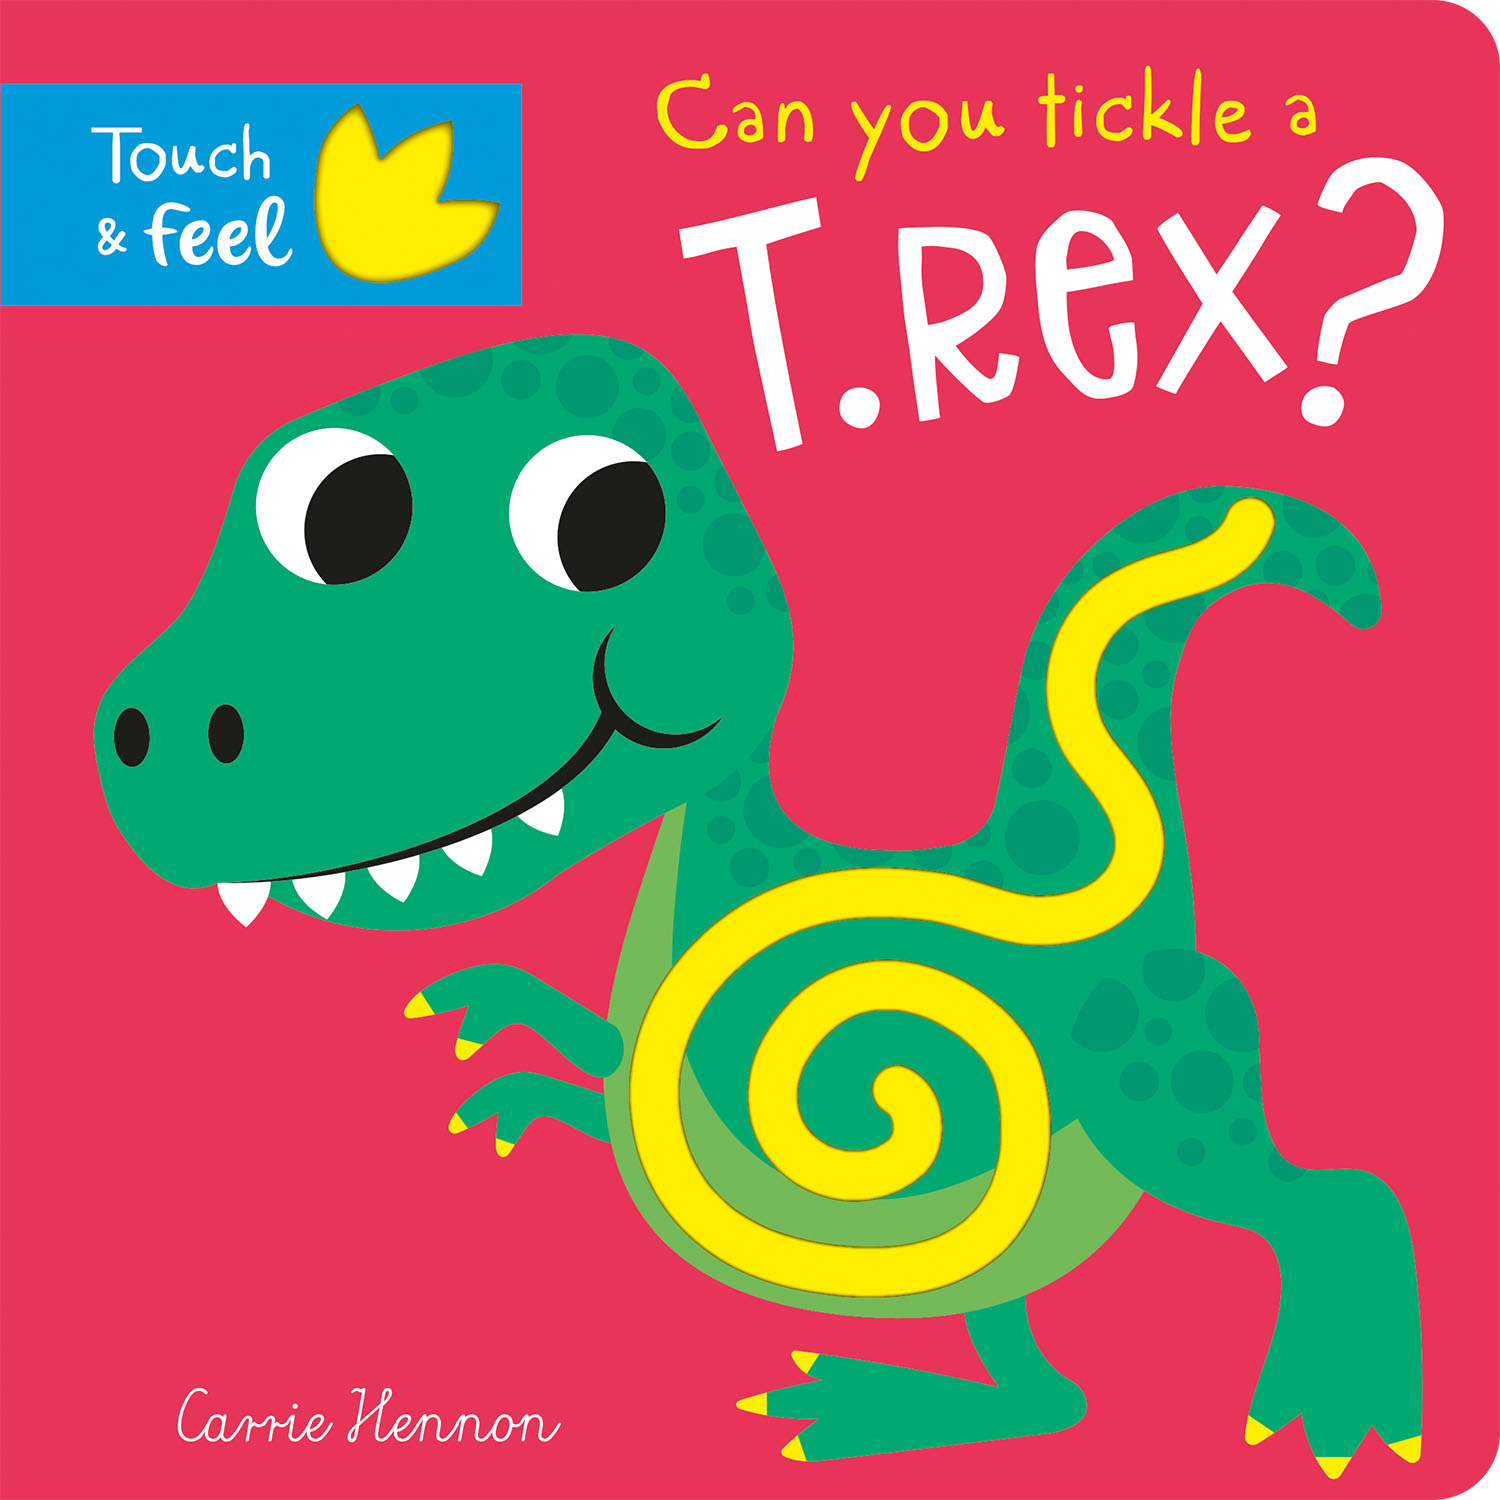 CAN YOU TICKLE A T. REX?